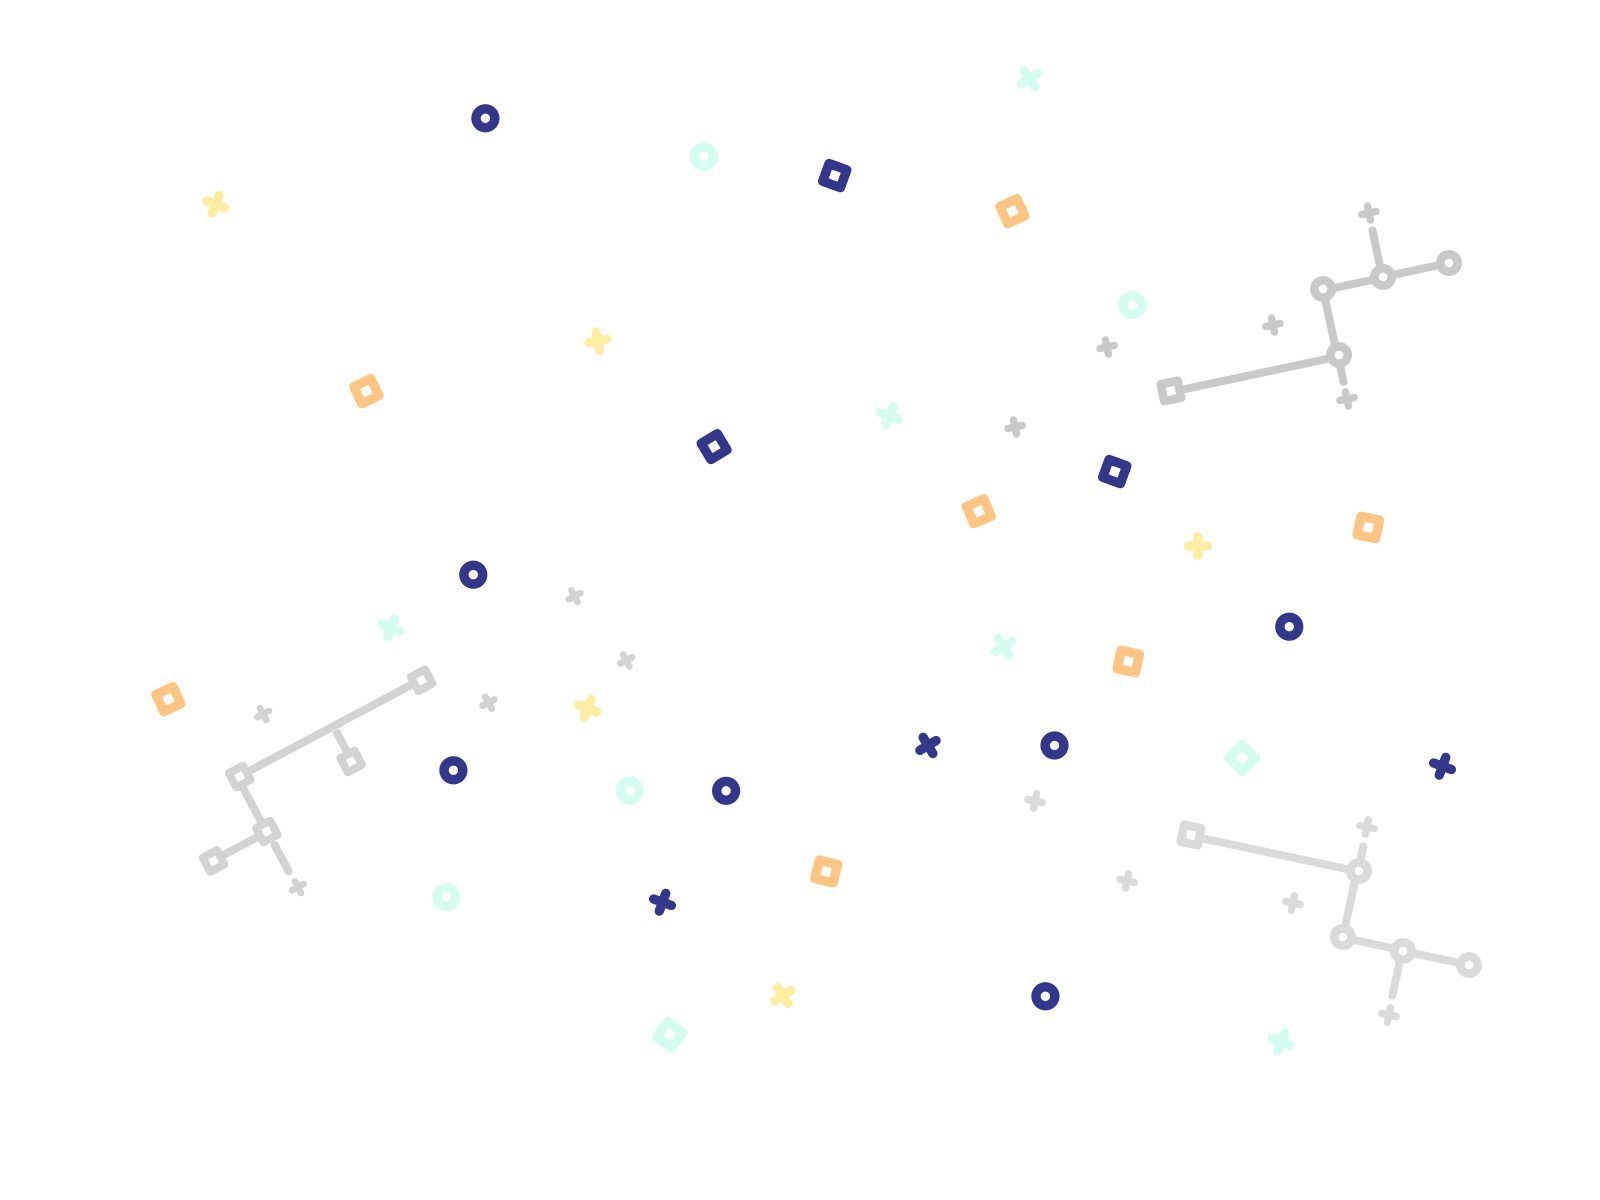 Colorful squares, circles, and crosses scattered in a random pattern